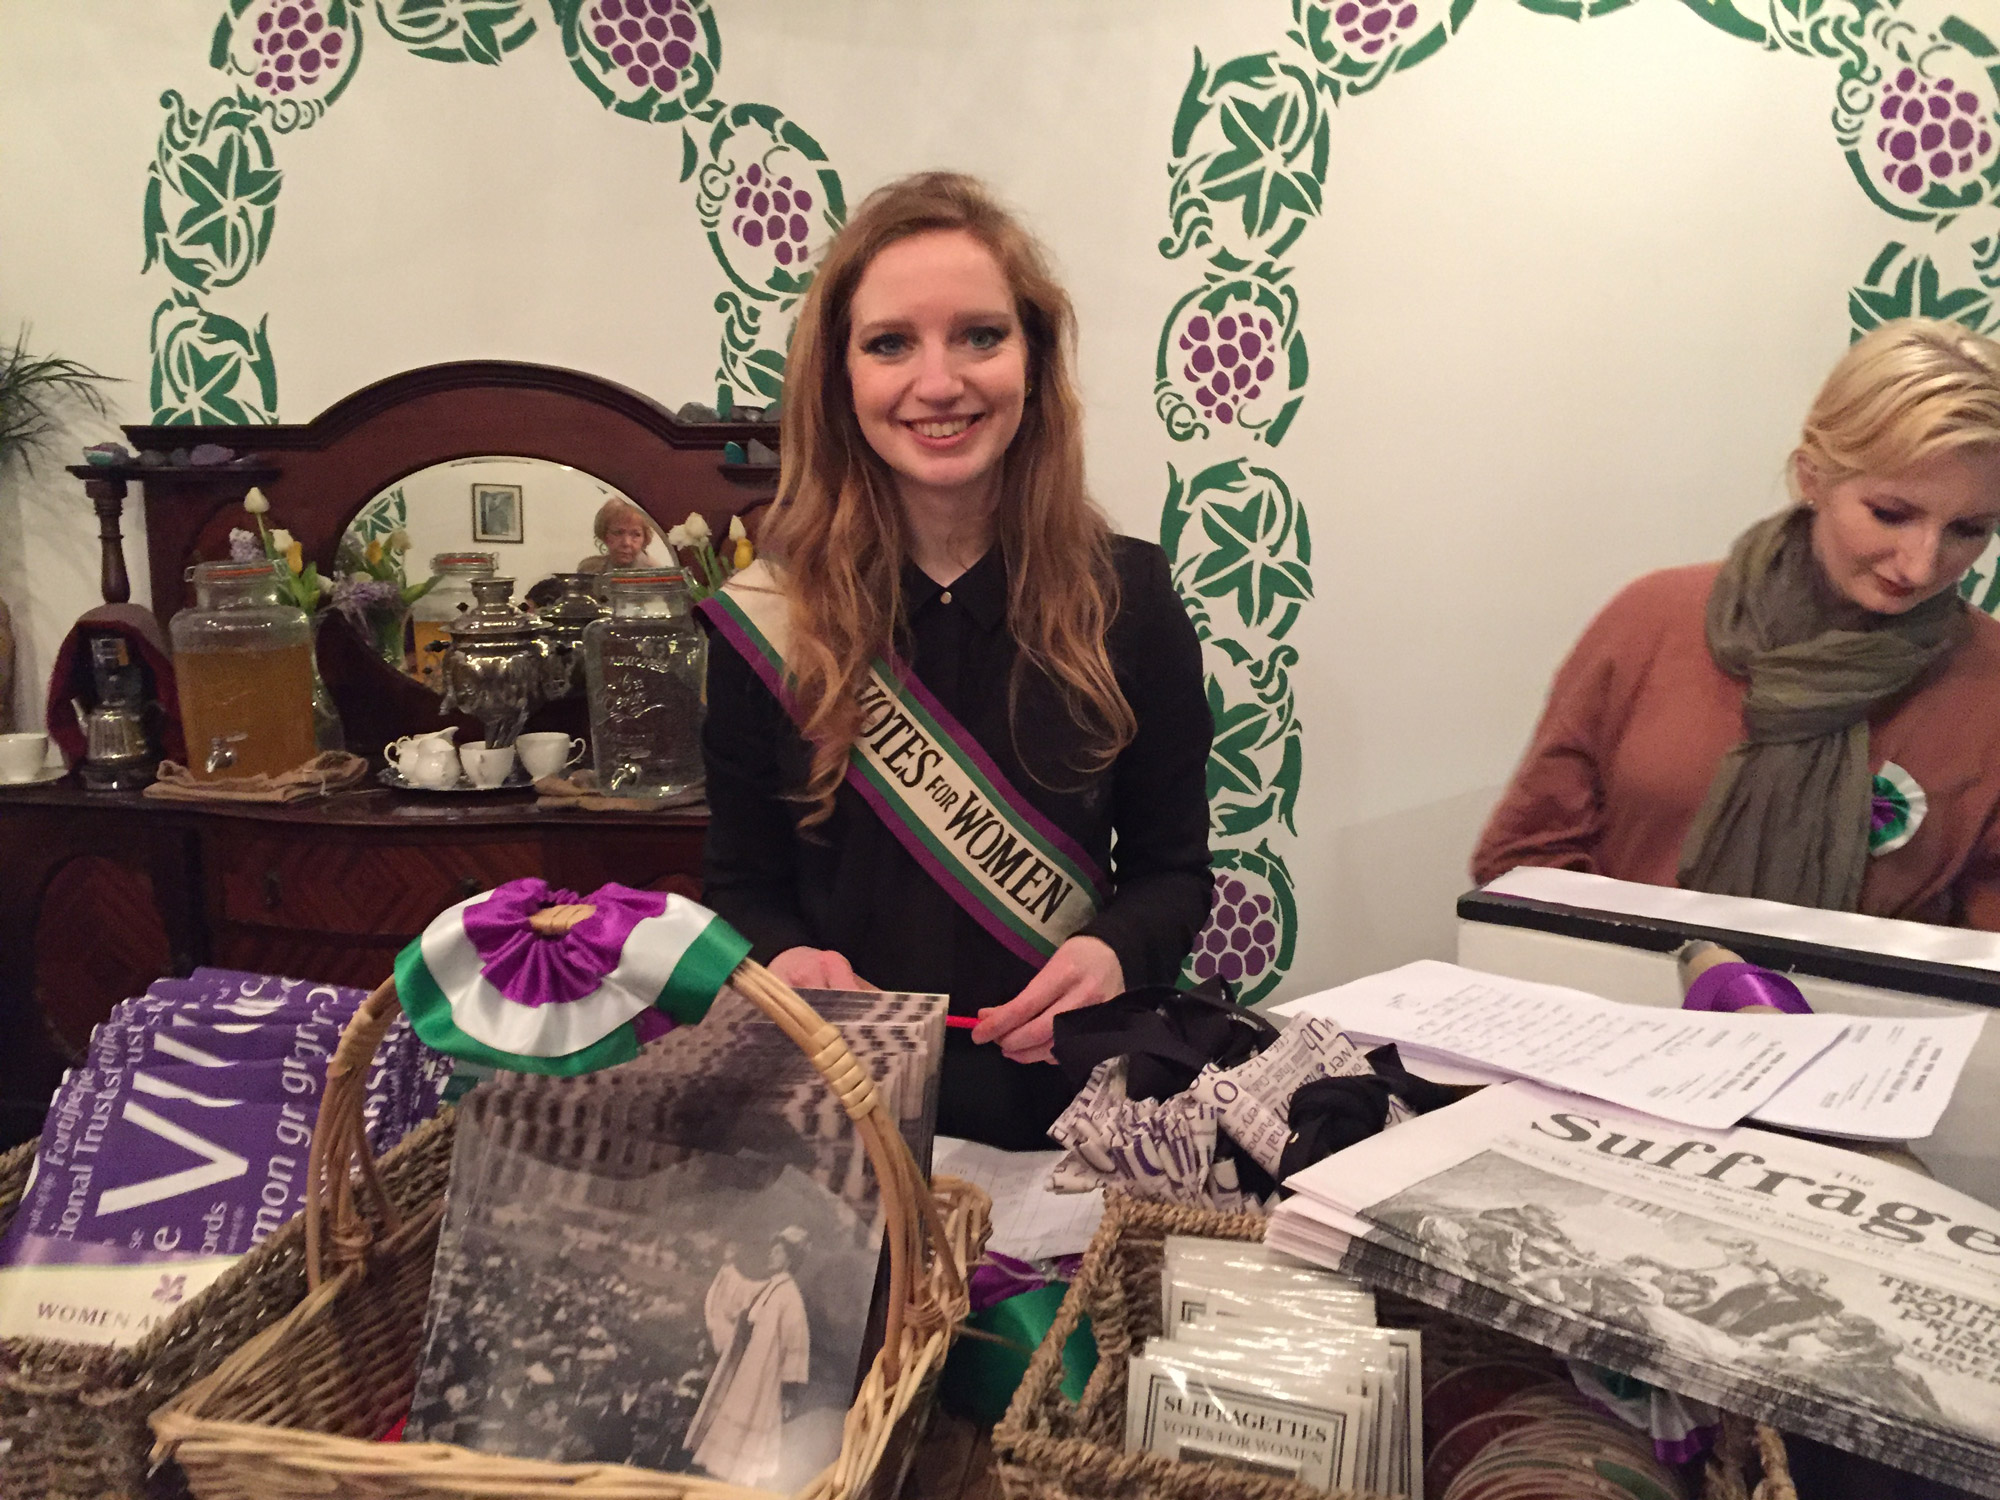 A woman, wearing a Votes for Women sash, smiles amongst items in a shop.